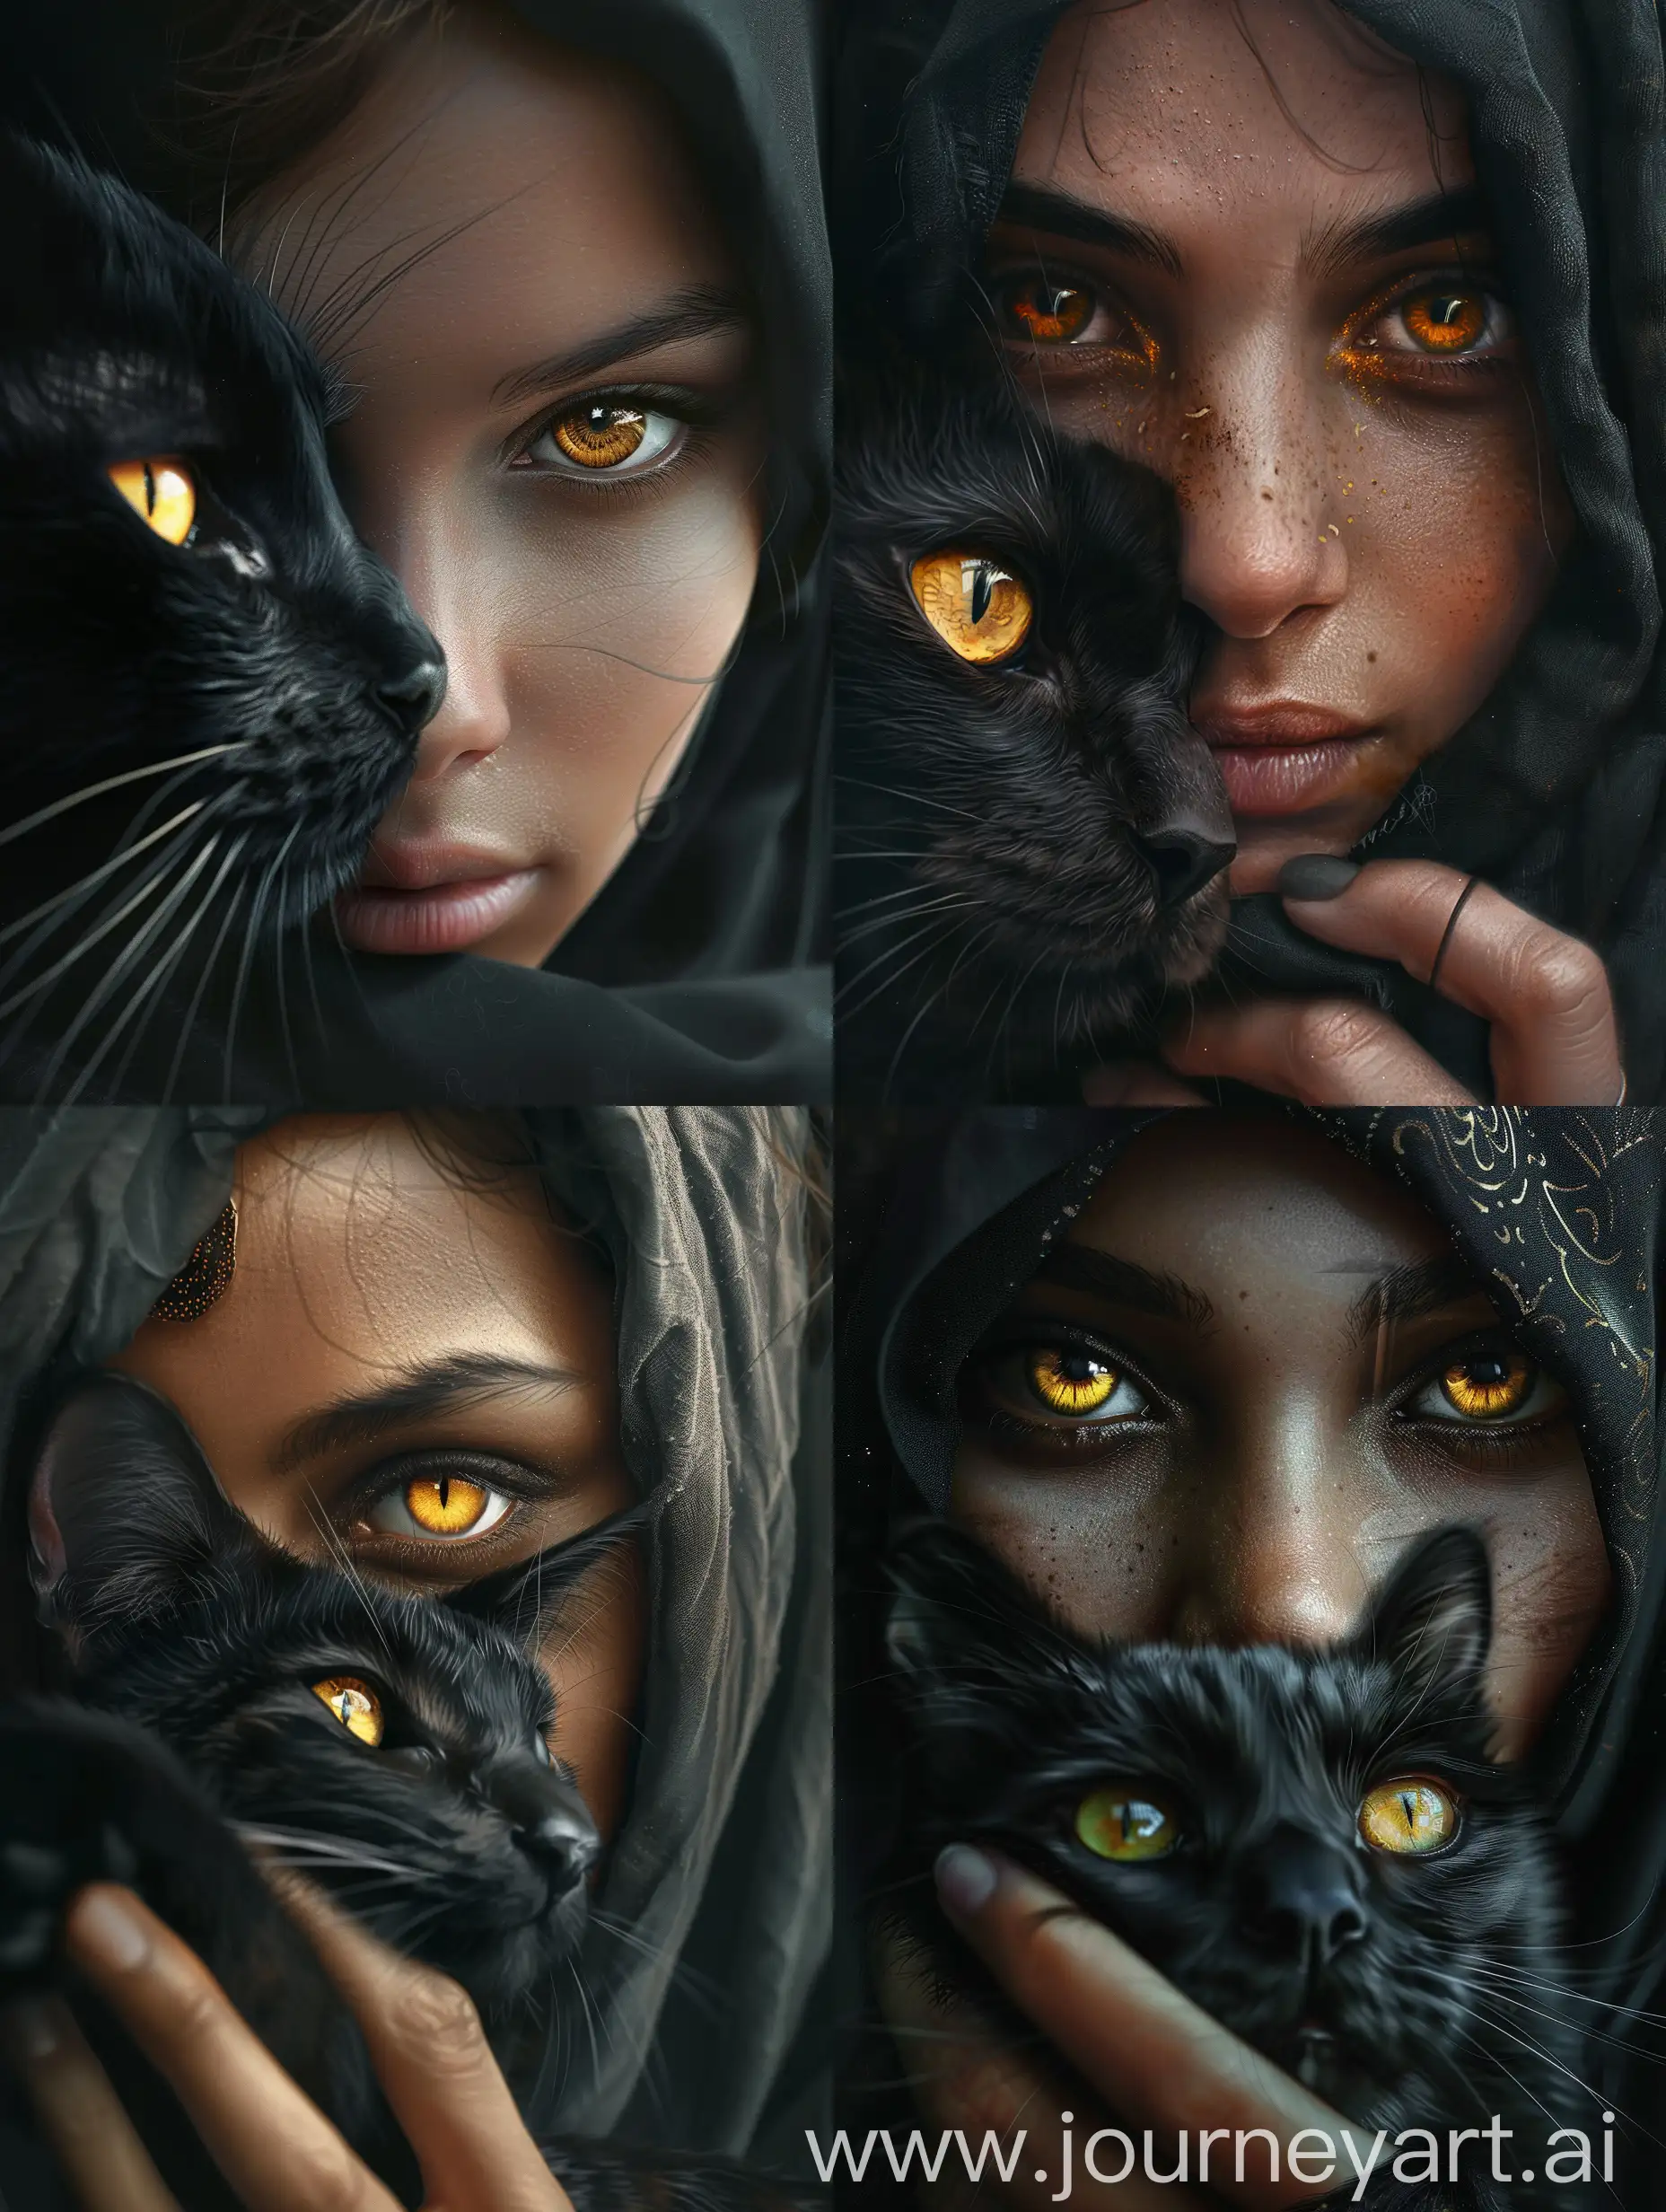 Intimate-Portrait-of-a-Young-Woman-in-Hijab-with-a-Striking-Black-Cat